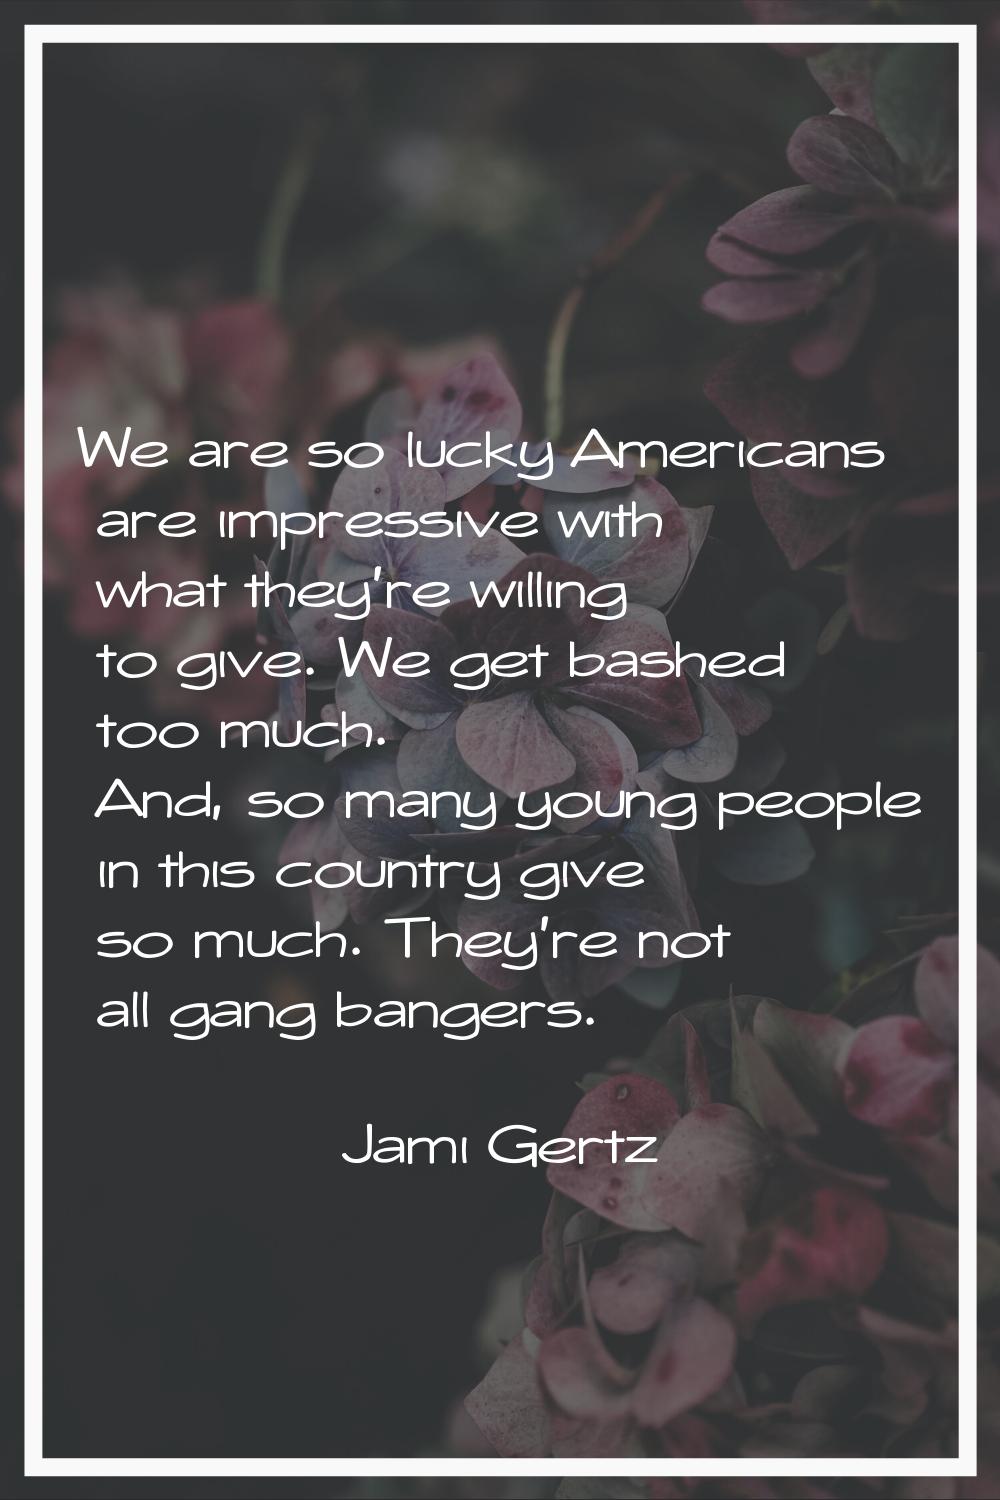 We are so lucky Americans are impressive with what they're willing to give. We get bashed too much.